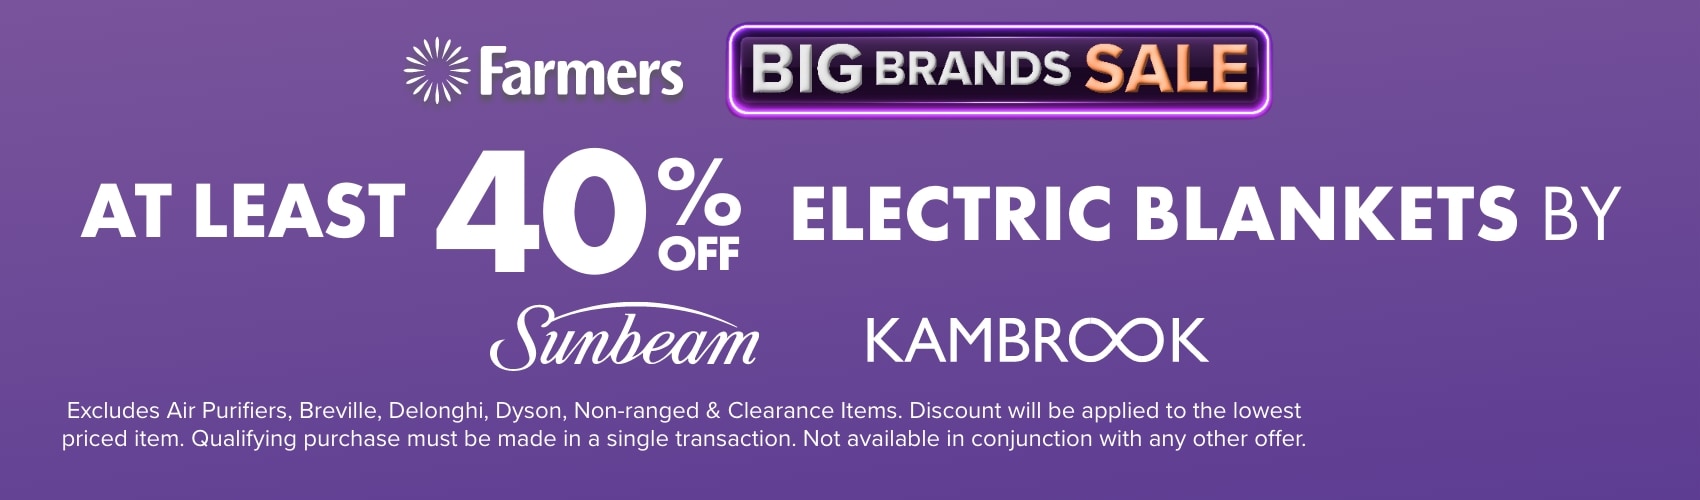 AT LEAST 40% OFF Electric Blankets by Sunbeam & Kambrook